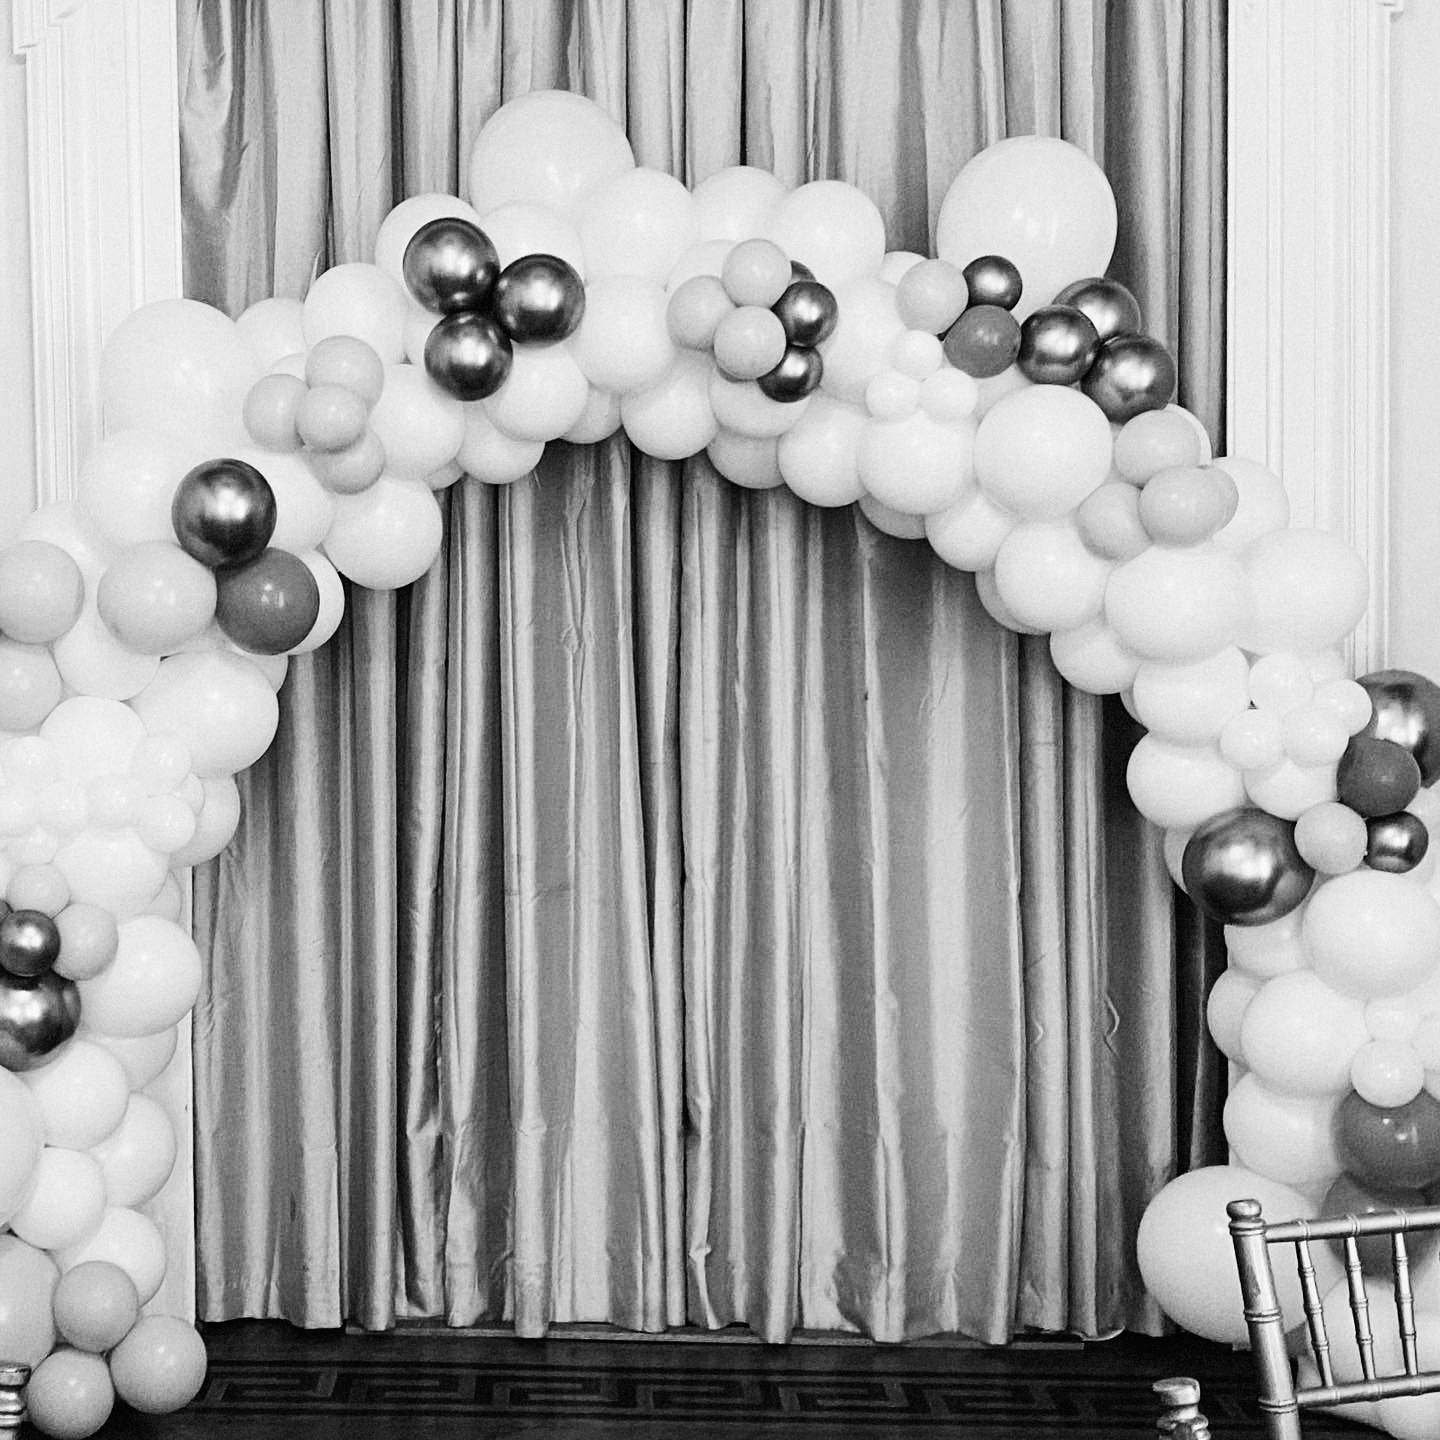  A balloon arch makes the perfect backdrop for a bachlorette party photo set up! 